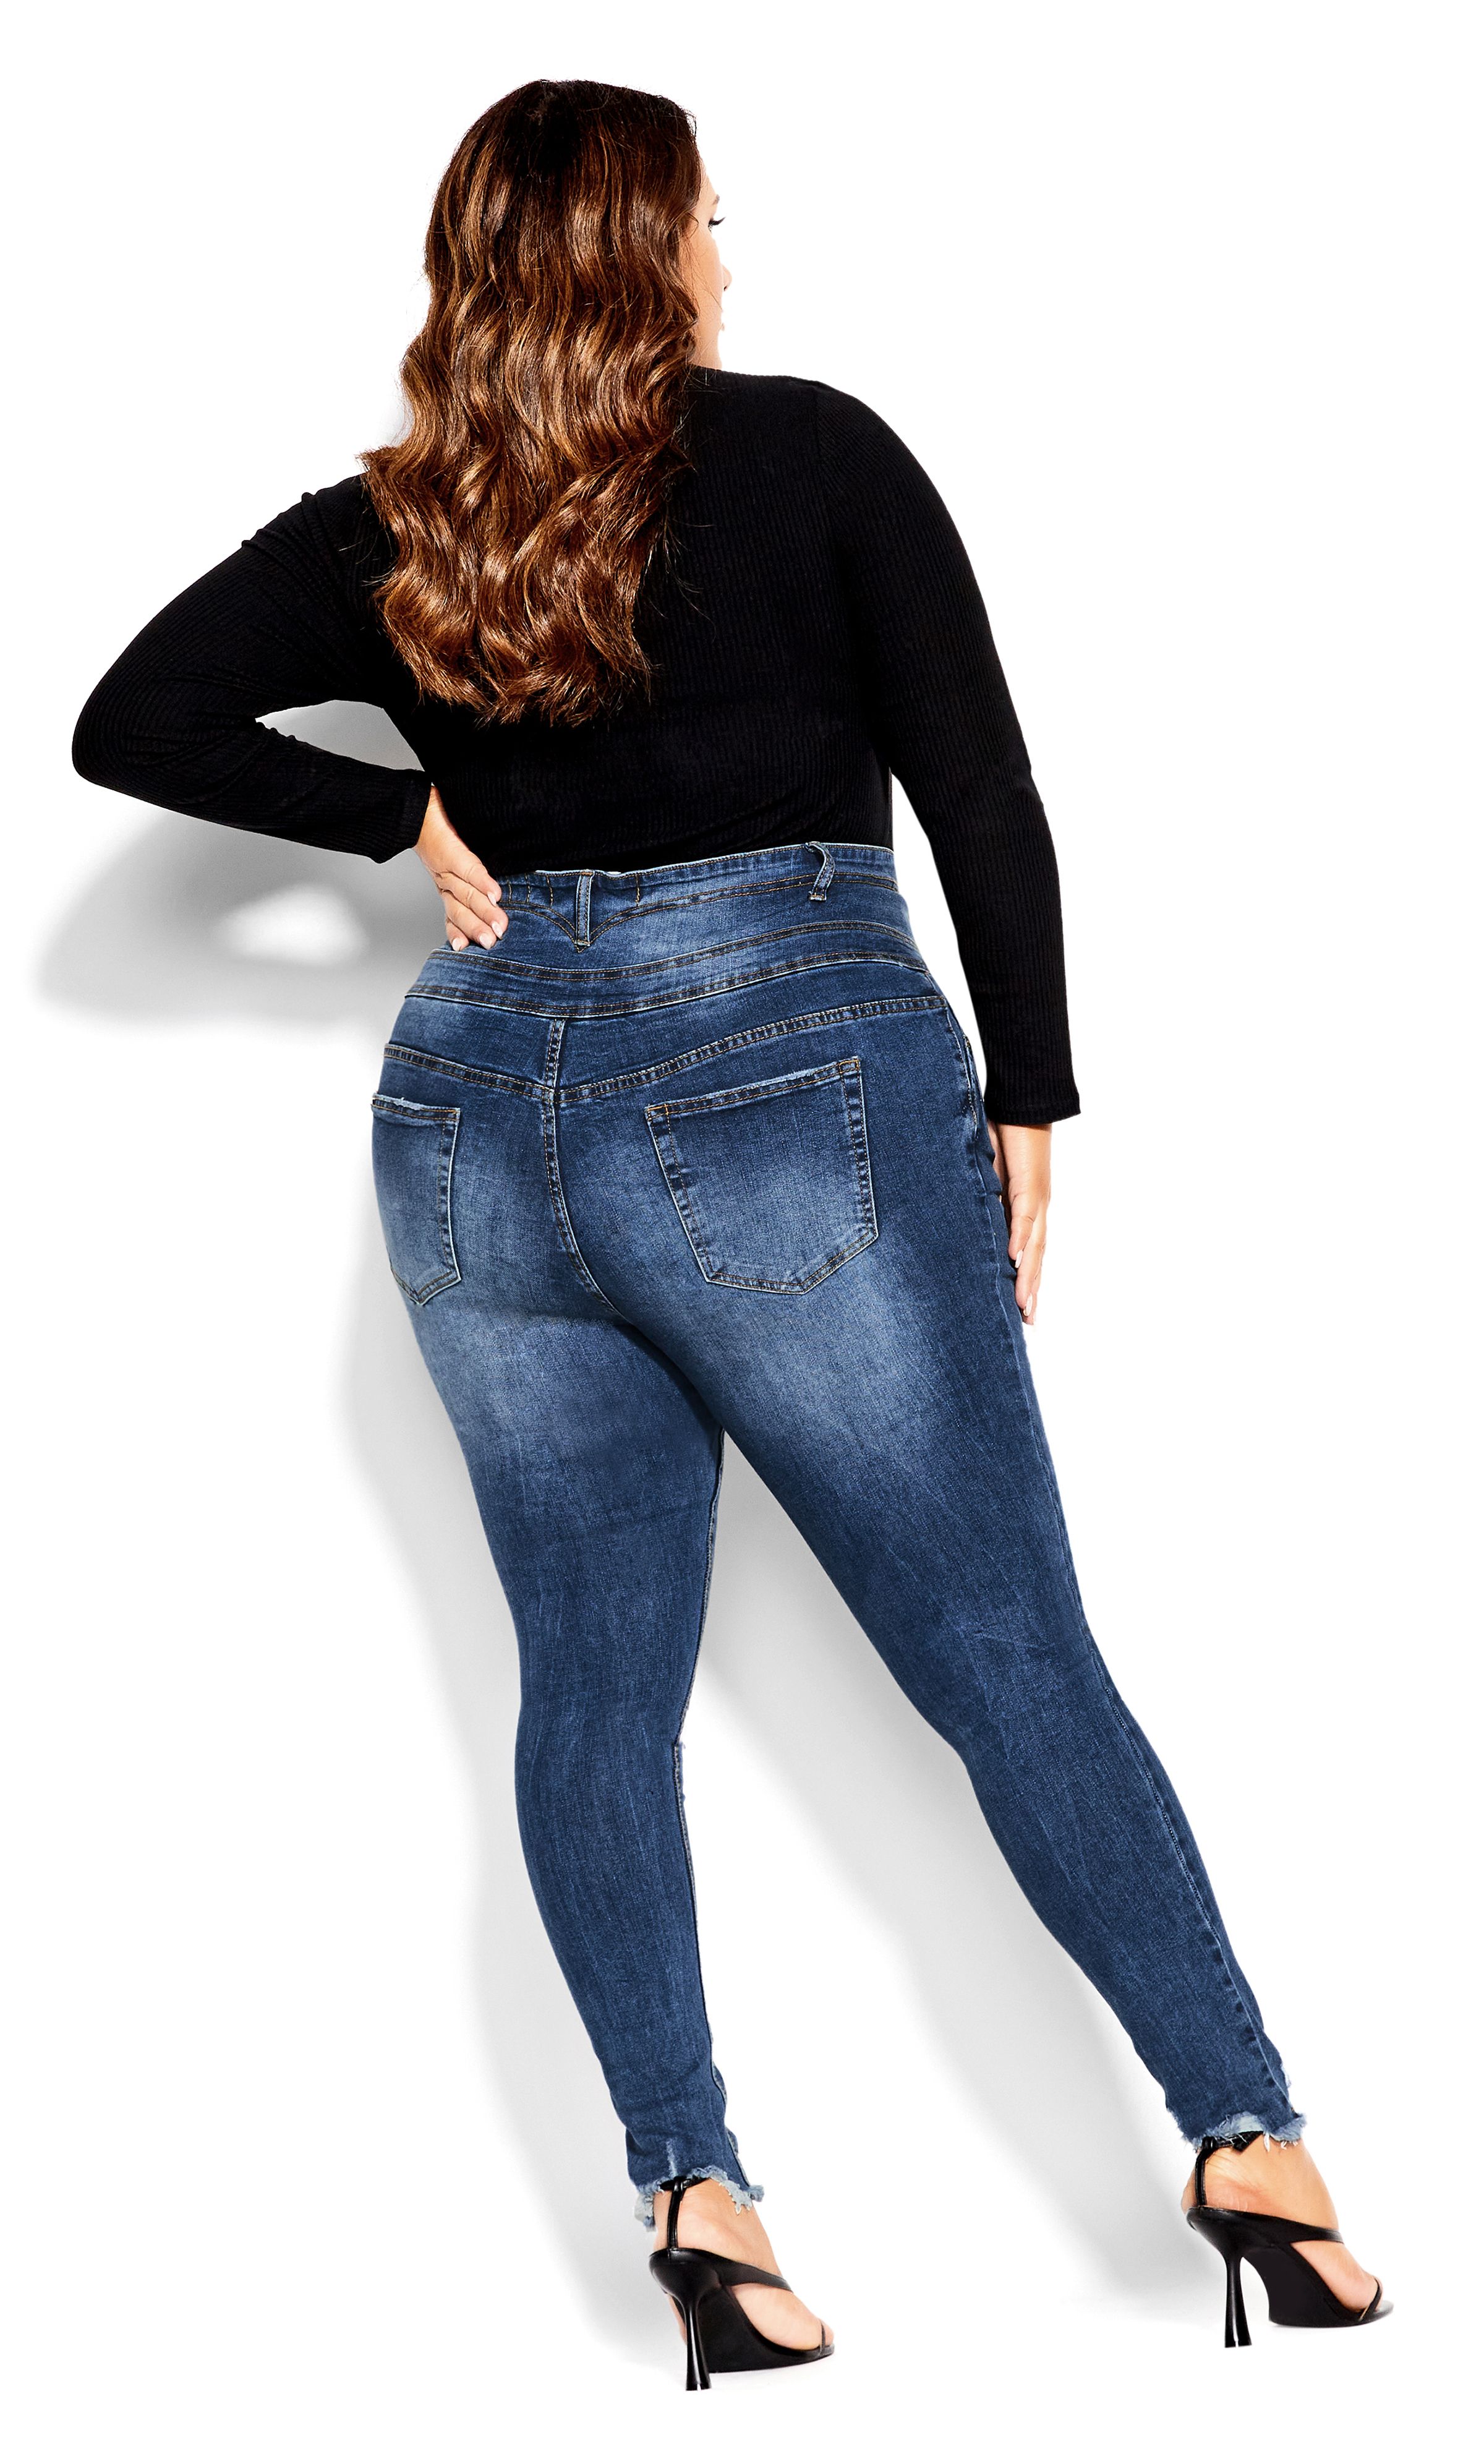 The Asha Trail Blazer Jean has been cut for an apply body figure, flaunting a flattering high rise and skinny leg. In a trendy mid denim with faded detail and distressed touches, these form-flattering jeans tick all the boxes. Key Features Include: - High rise - The perfect fit for an apple body shape - Skinny leg - Quadruple button & zip fly closure - Stretch Cotton blend denim fabrication - High denim fibre retention to maintain shape - Signature Chic Denim hardware throughout zips, buttons and rivets - Distressed detail - Frayed hems - Ankle grazer length Keep it casual with a slogan tee and sneakers for weekend hangs.